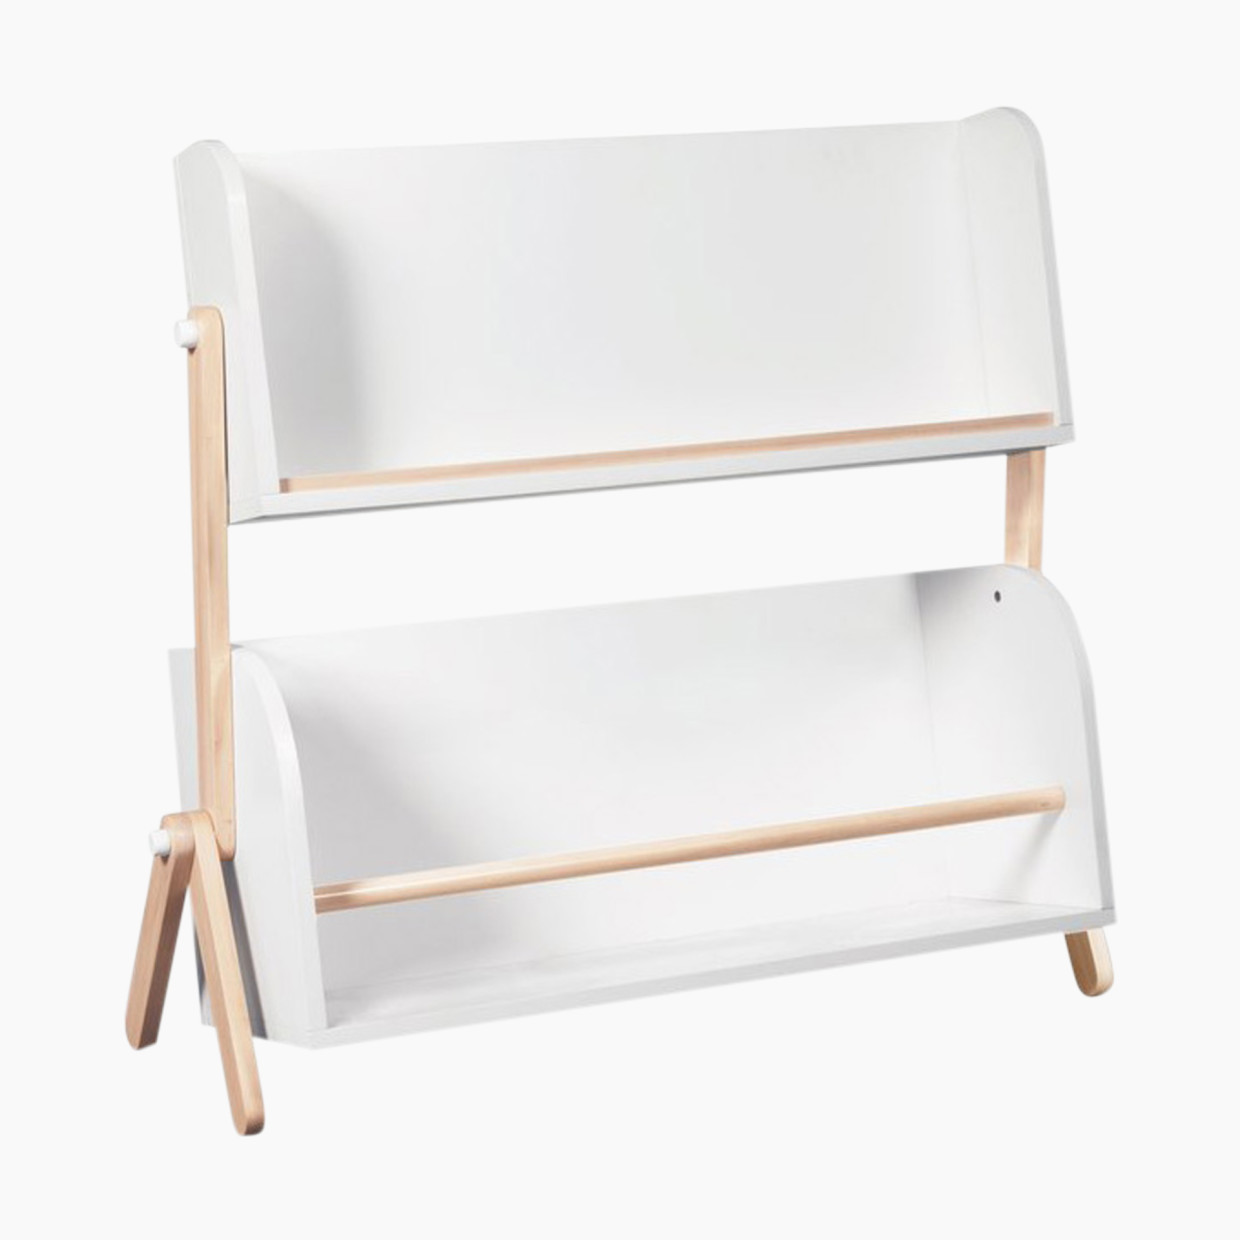 babyletto Tally Storage and Bookshelf - White/Washed Natural.